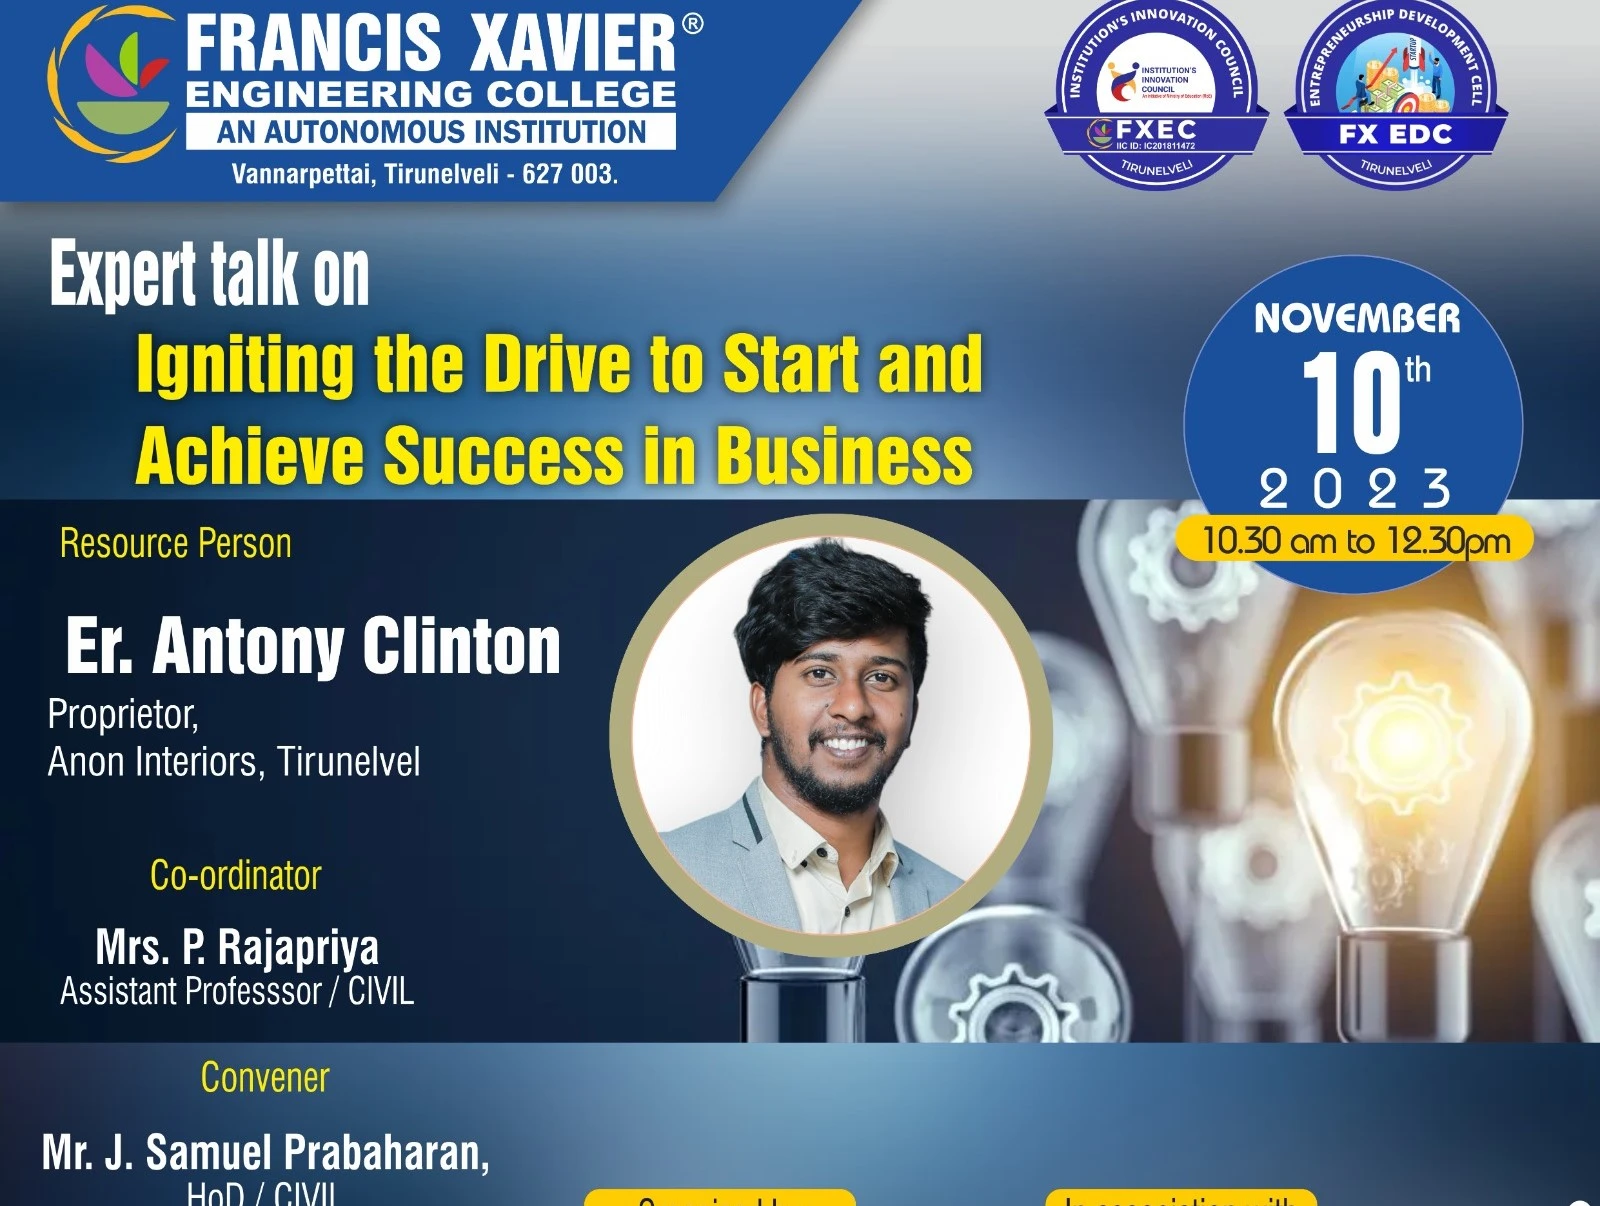 Igniting the Drive to Start and Achieve Success in Business